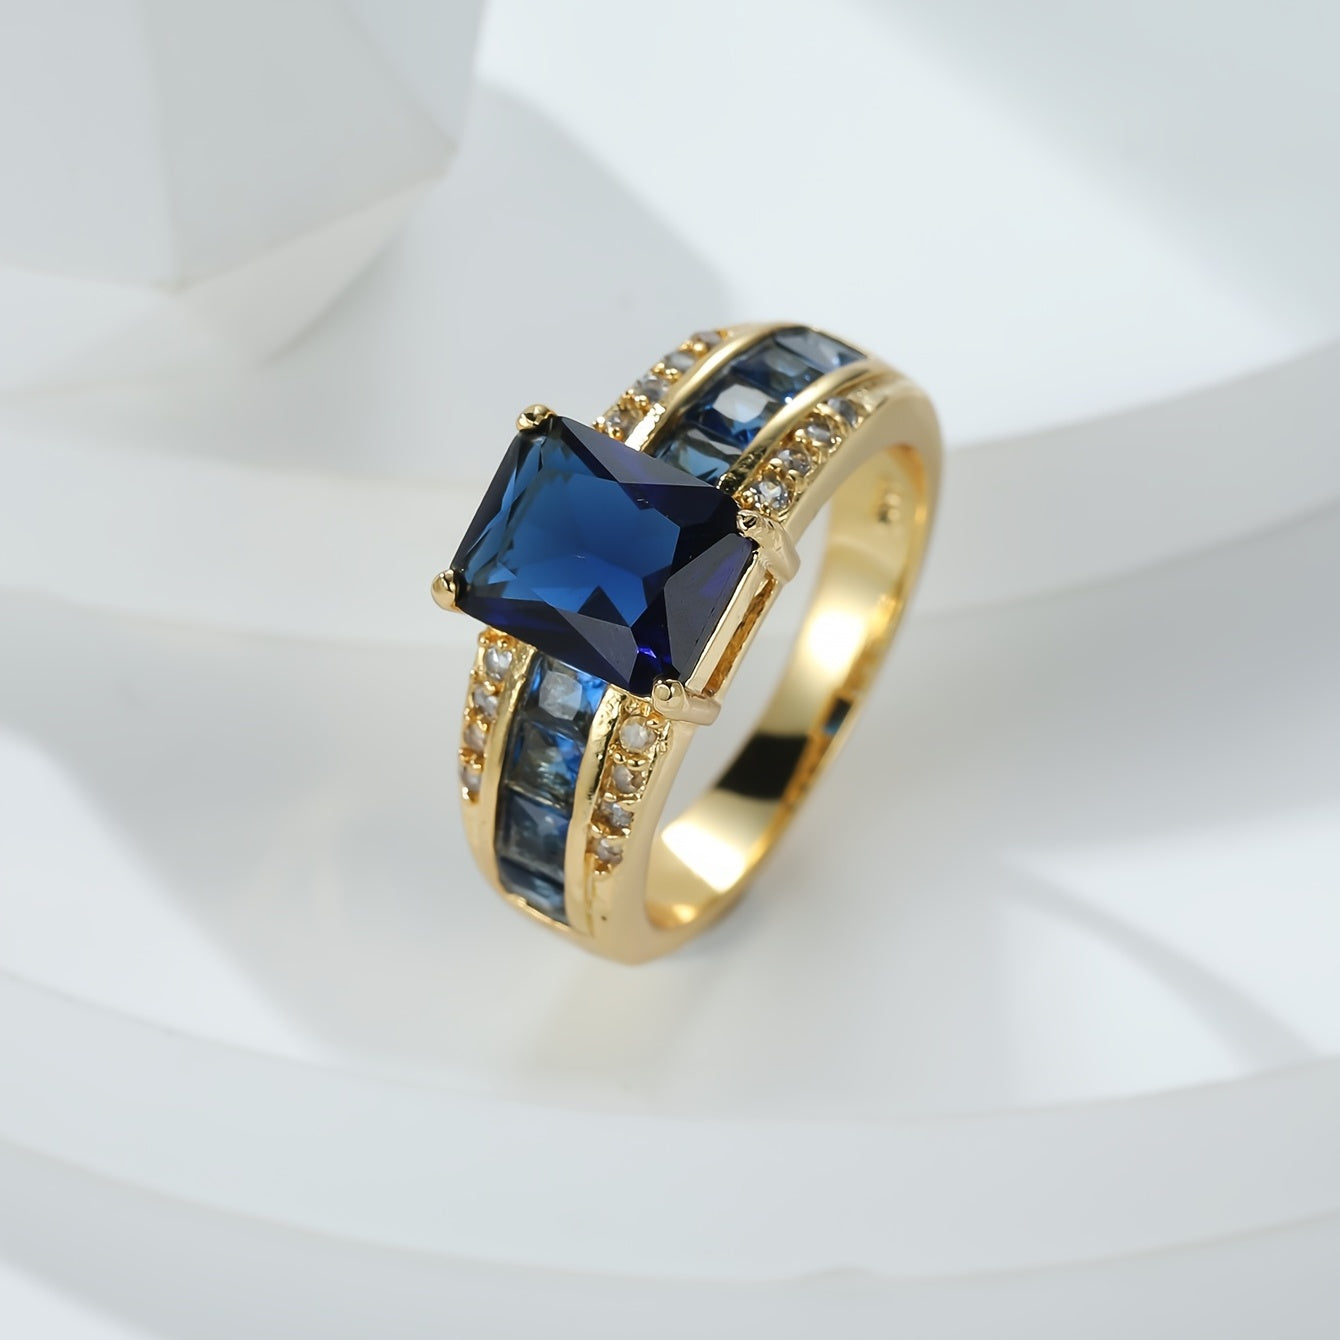 Gorgeous 18K Gold Plated Sapphire Blue Zircon Eternity Ring - Perfect for Your Special Day!